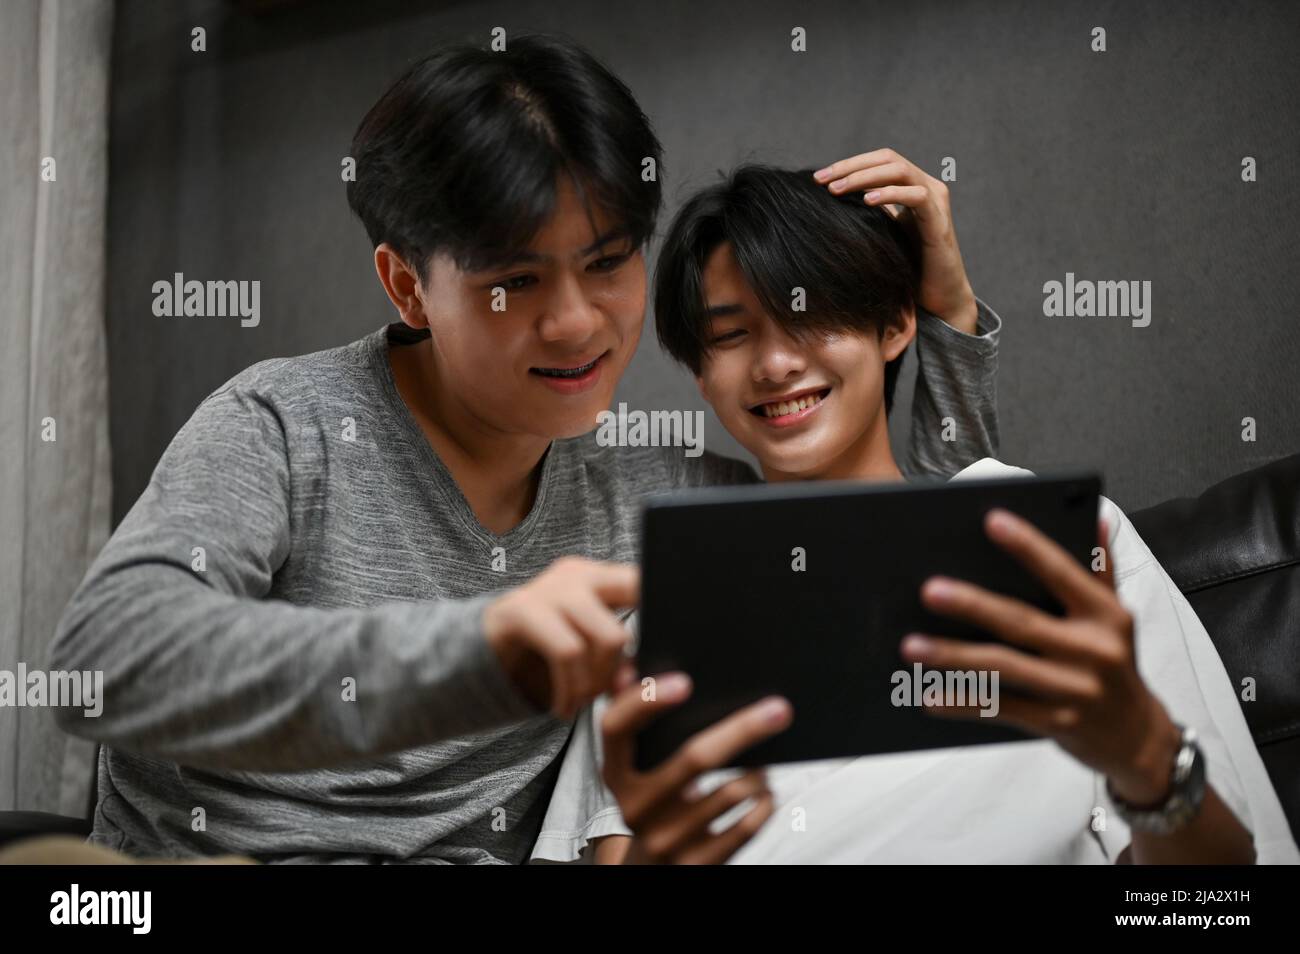 Two Asian teens gay men boyfriends spending time together, enjoy watching something on tablet in living room. LGBT couple's activities concept Stock Photo